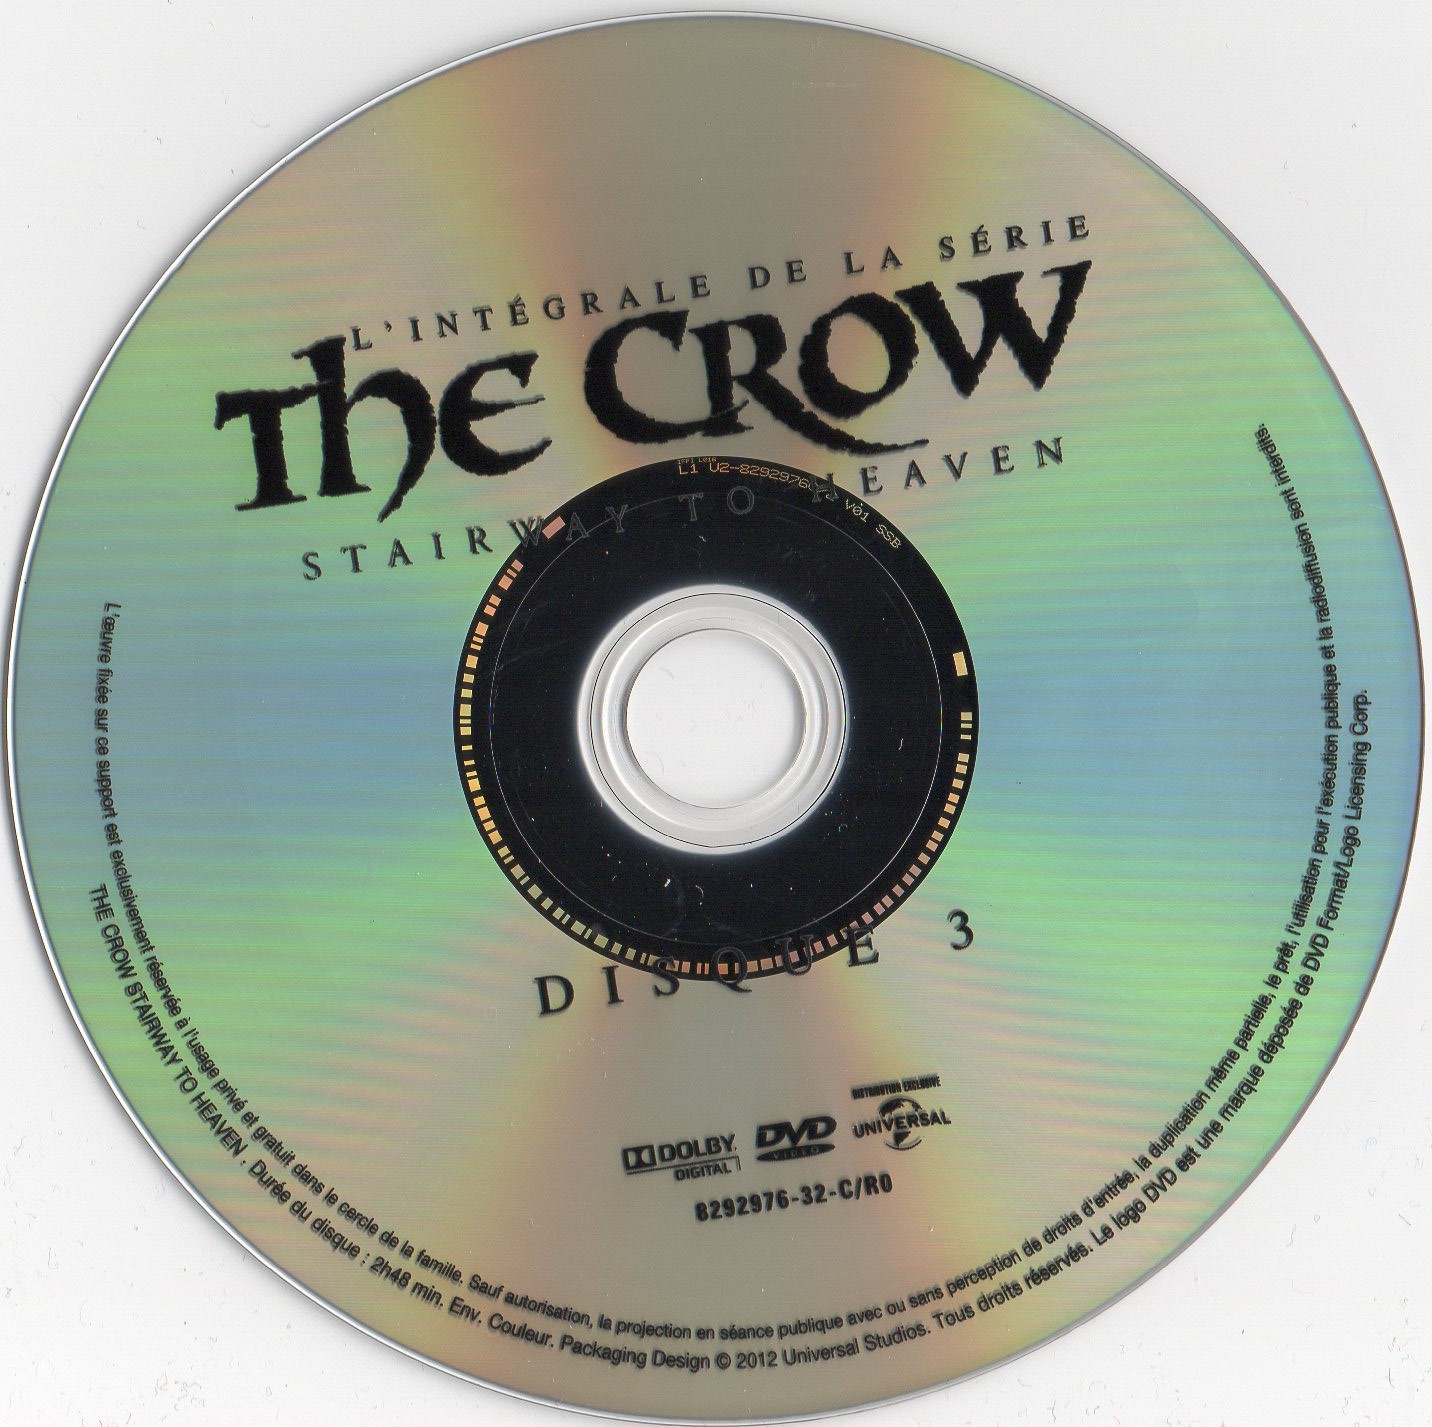 The crow stairway to heaven DISC 3